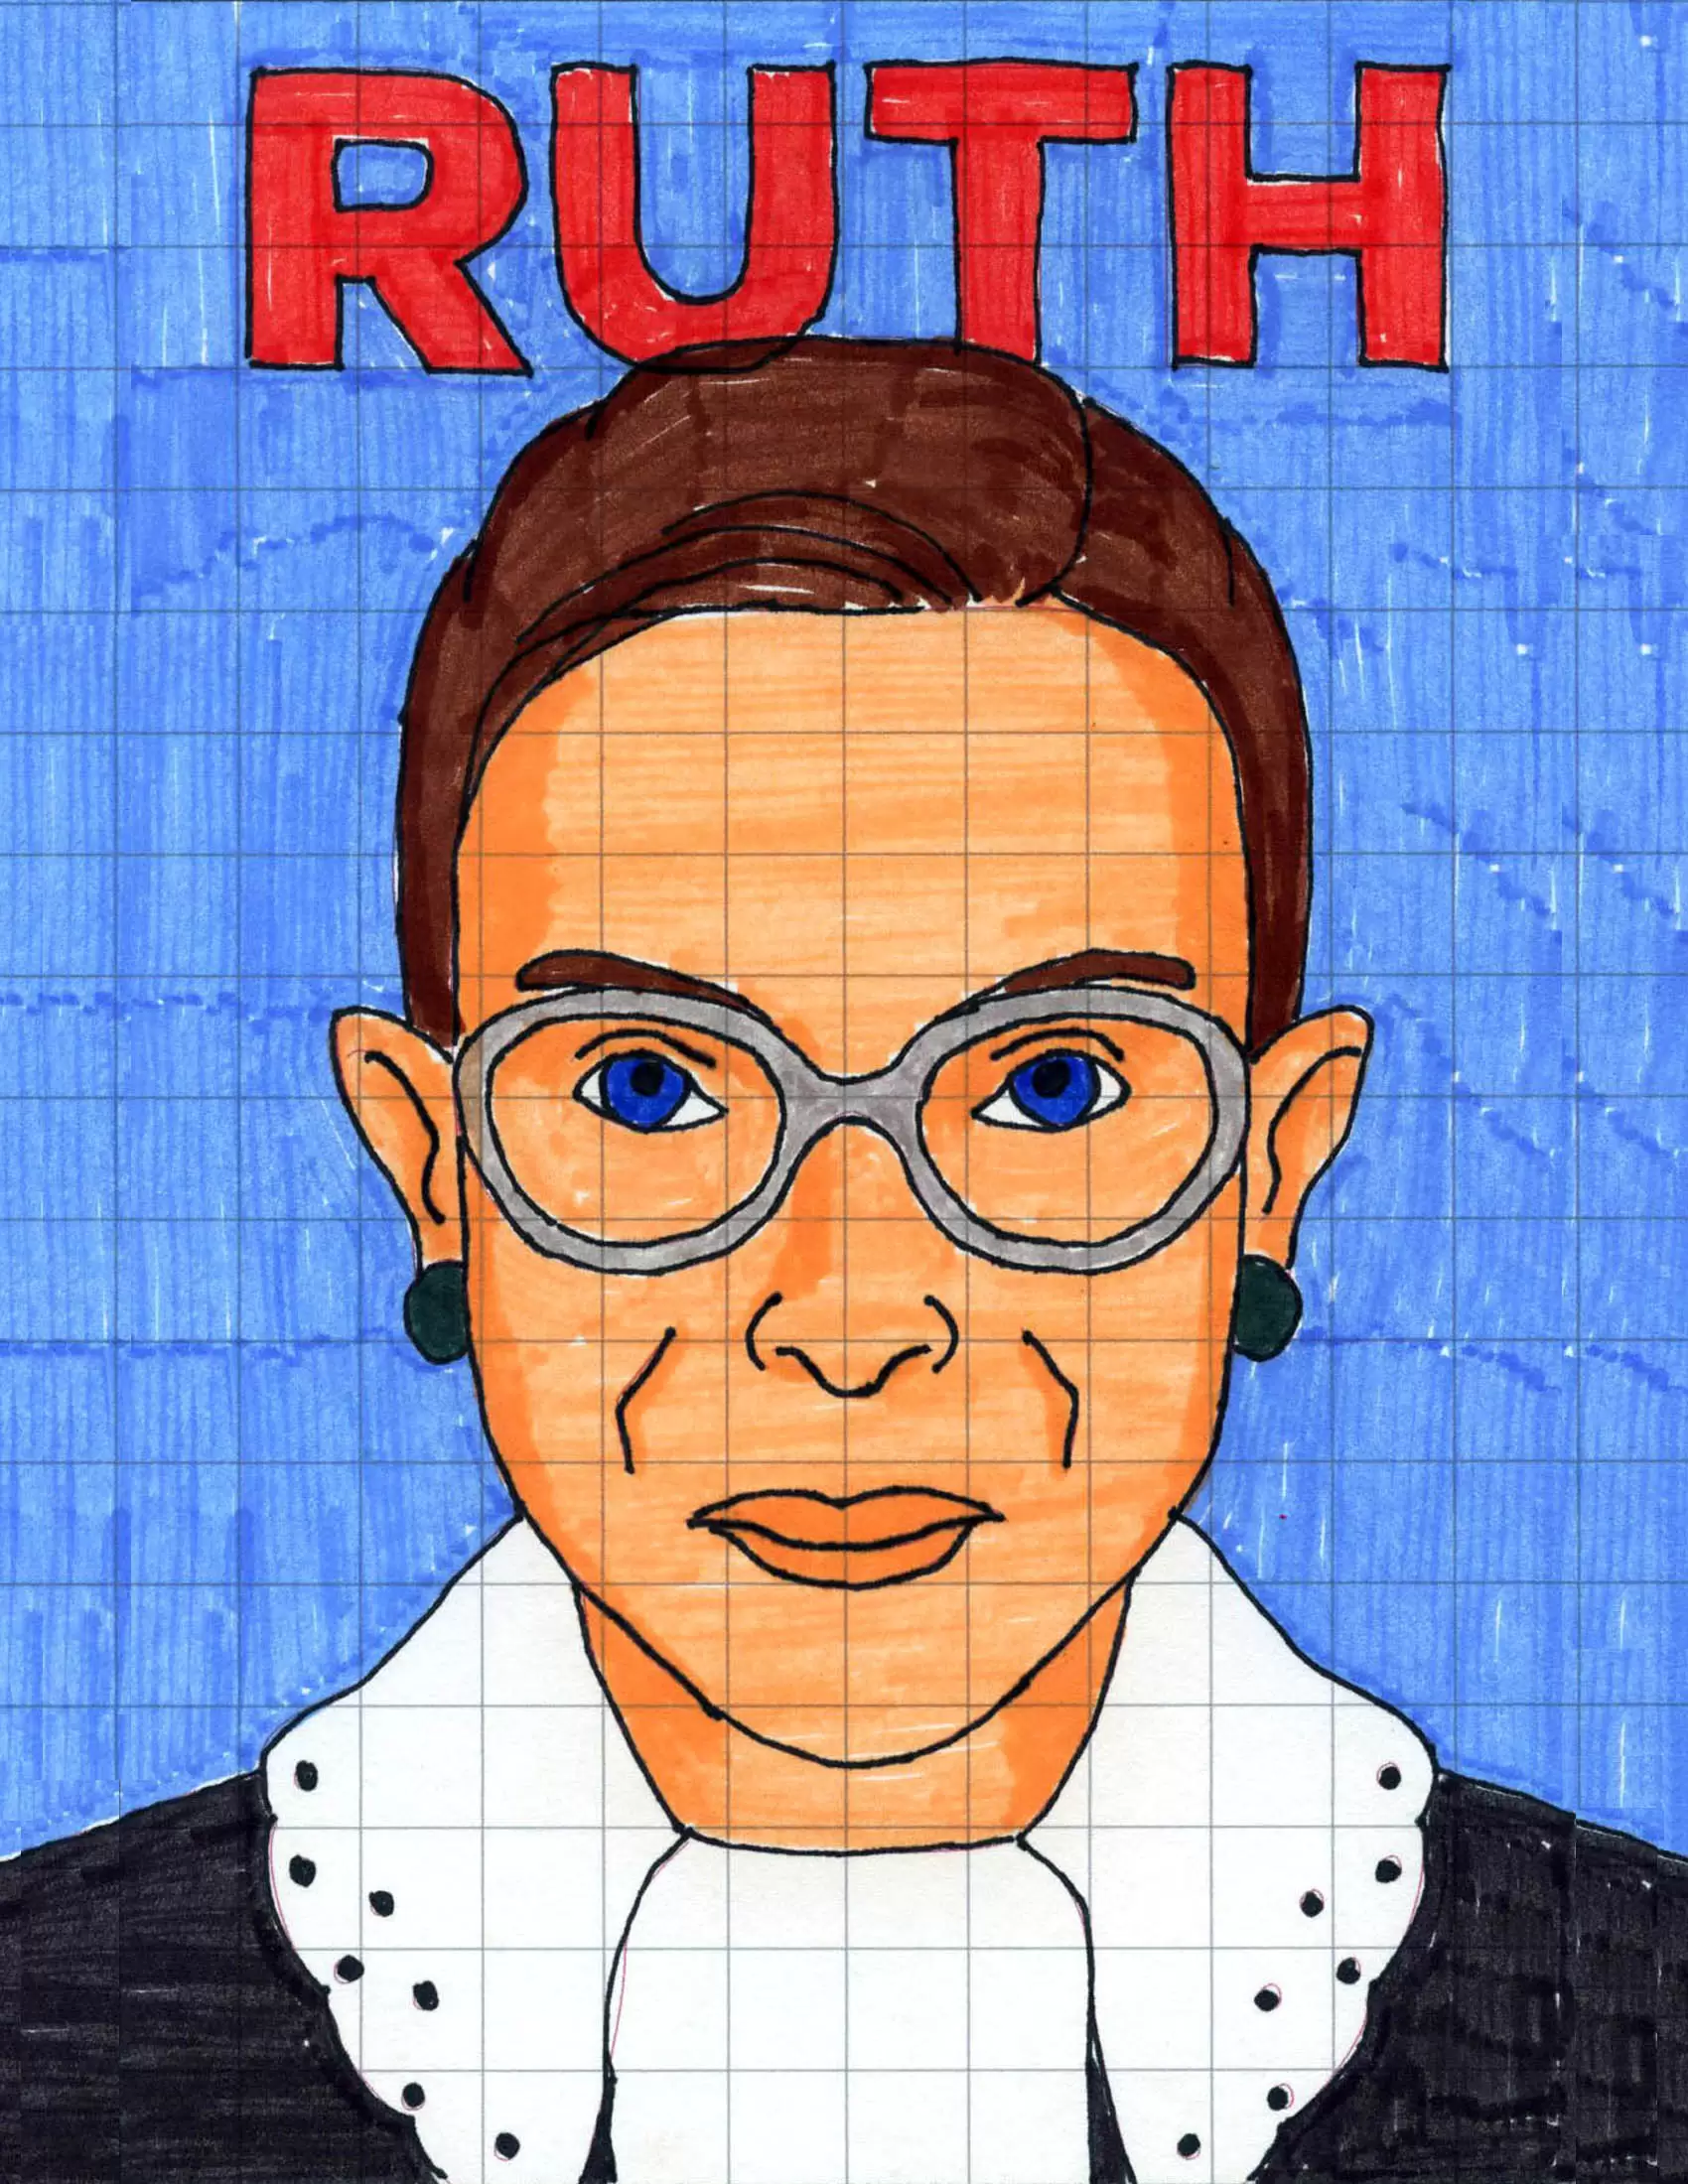 Remarkable Women: How to Draw Ruth Bader Ginsburg